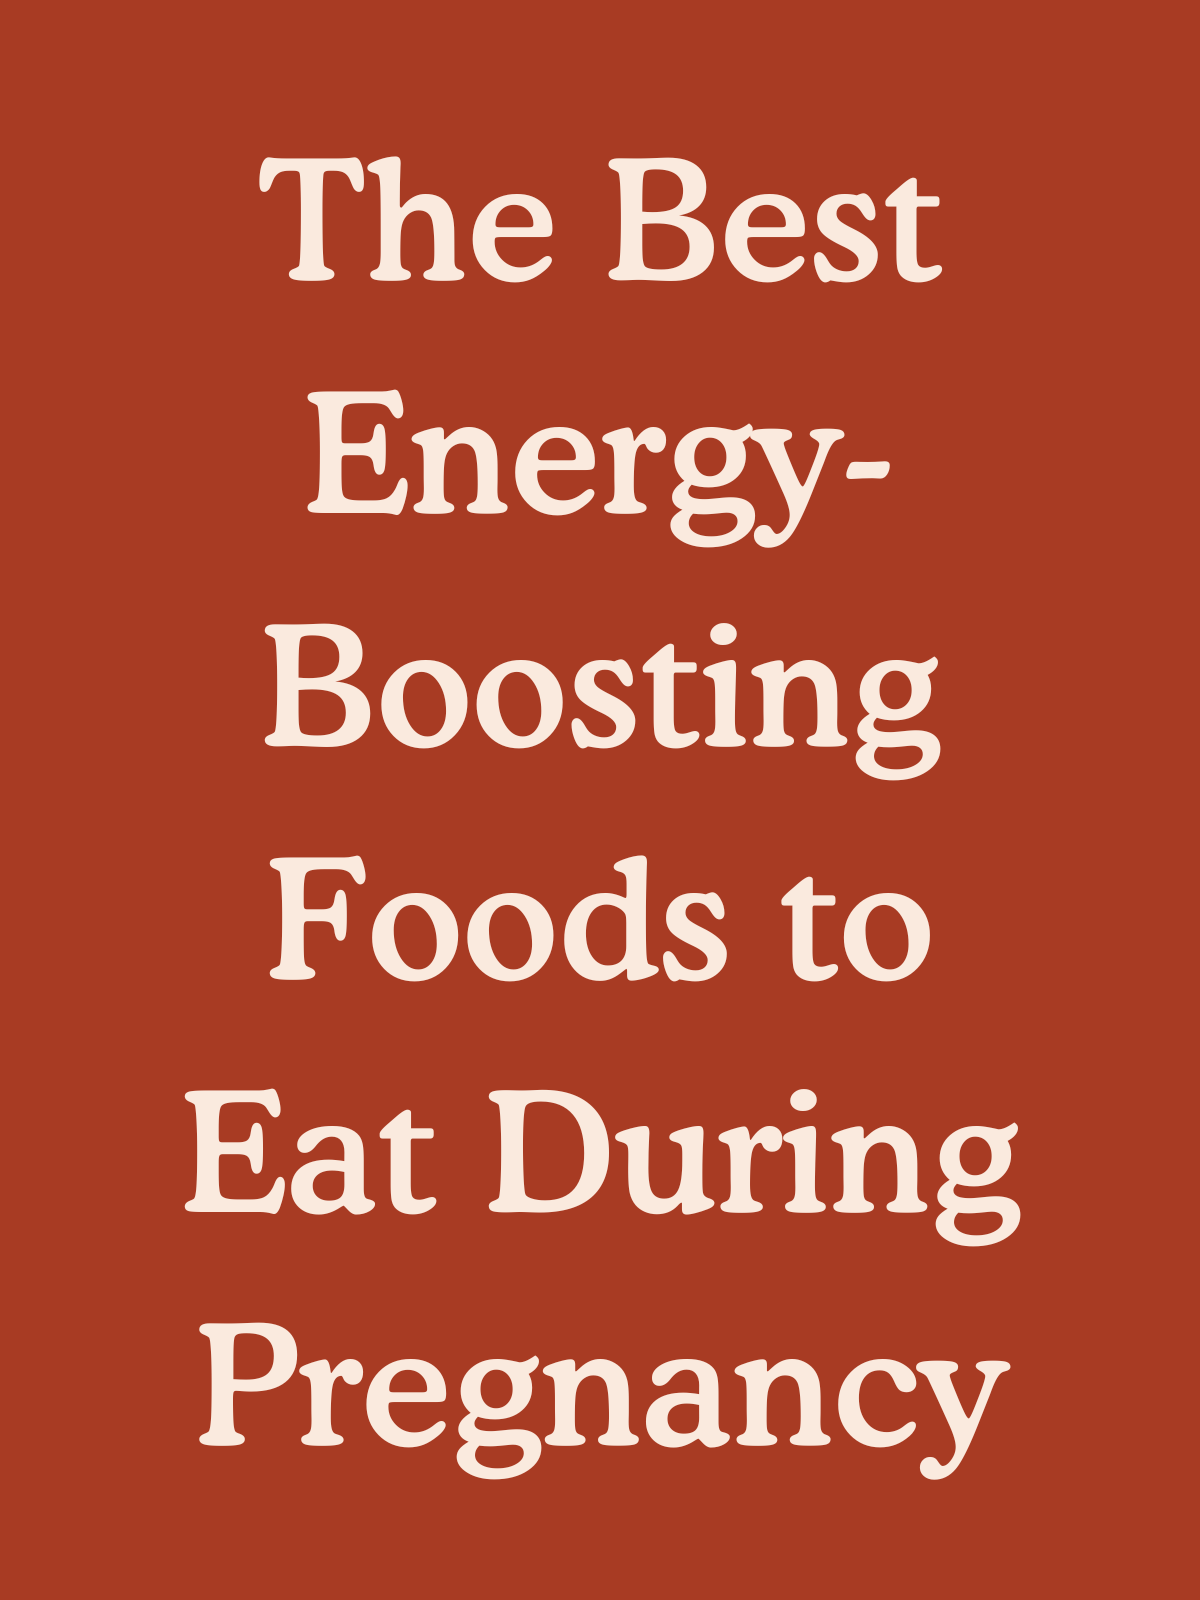 The Best Energy-Boosting Foods to Eat During Pregnancy